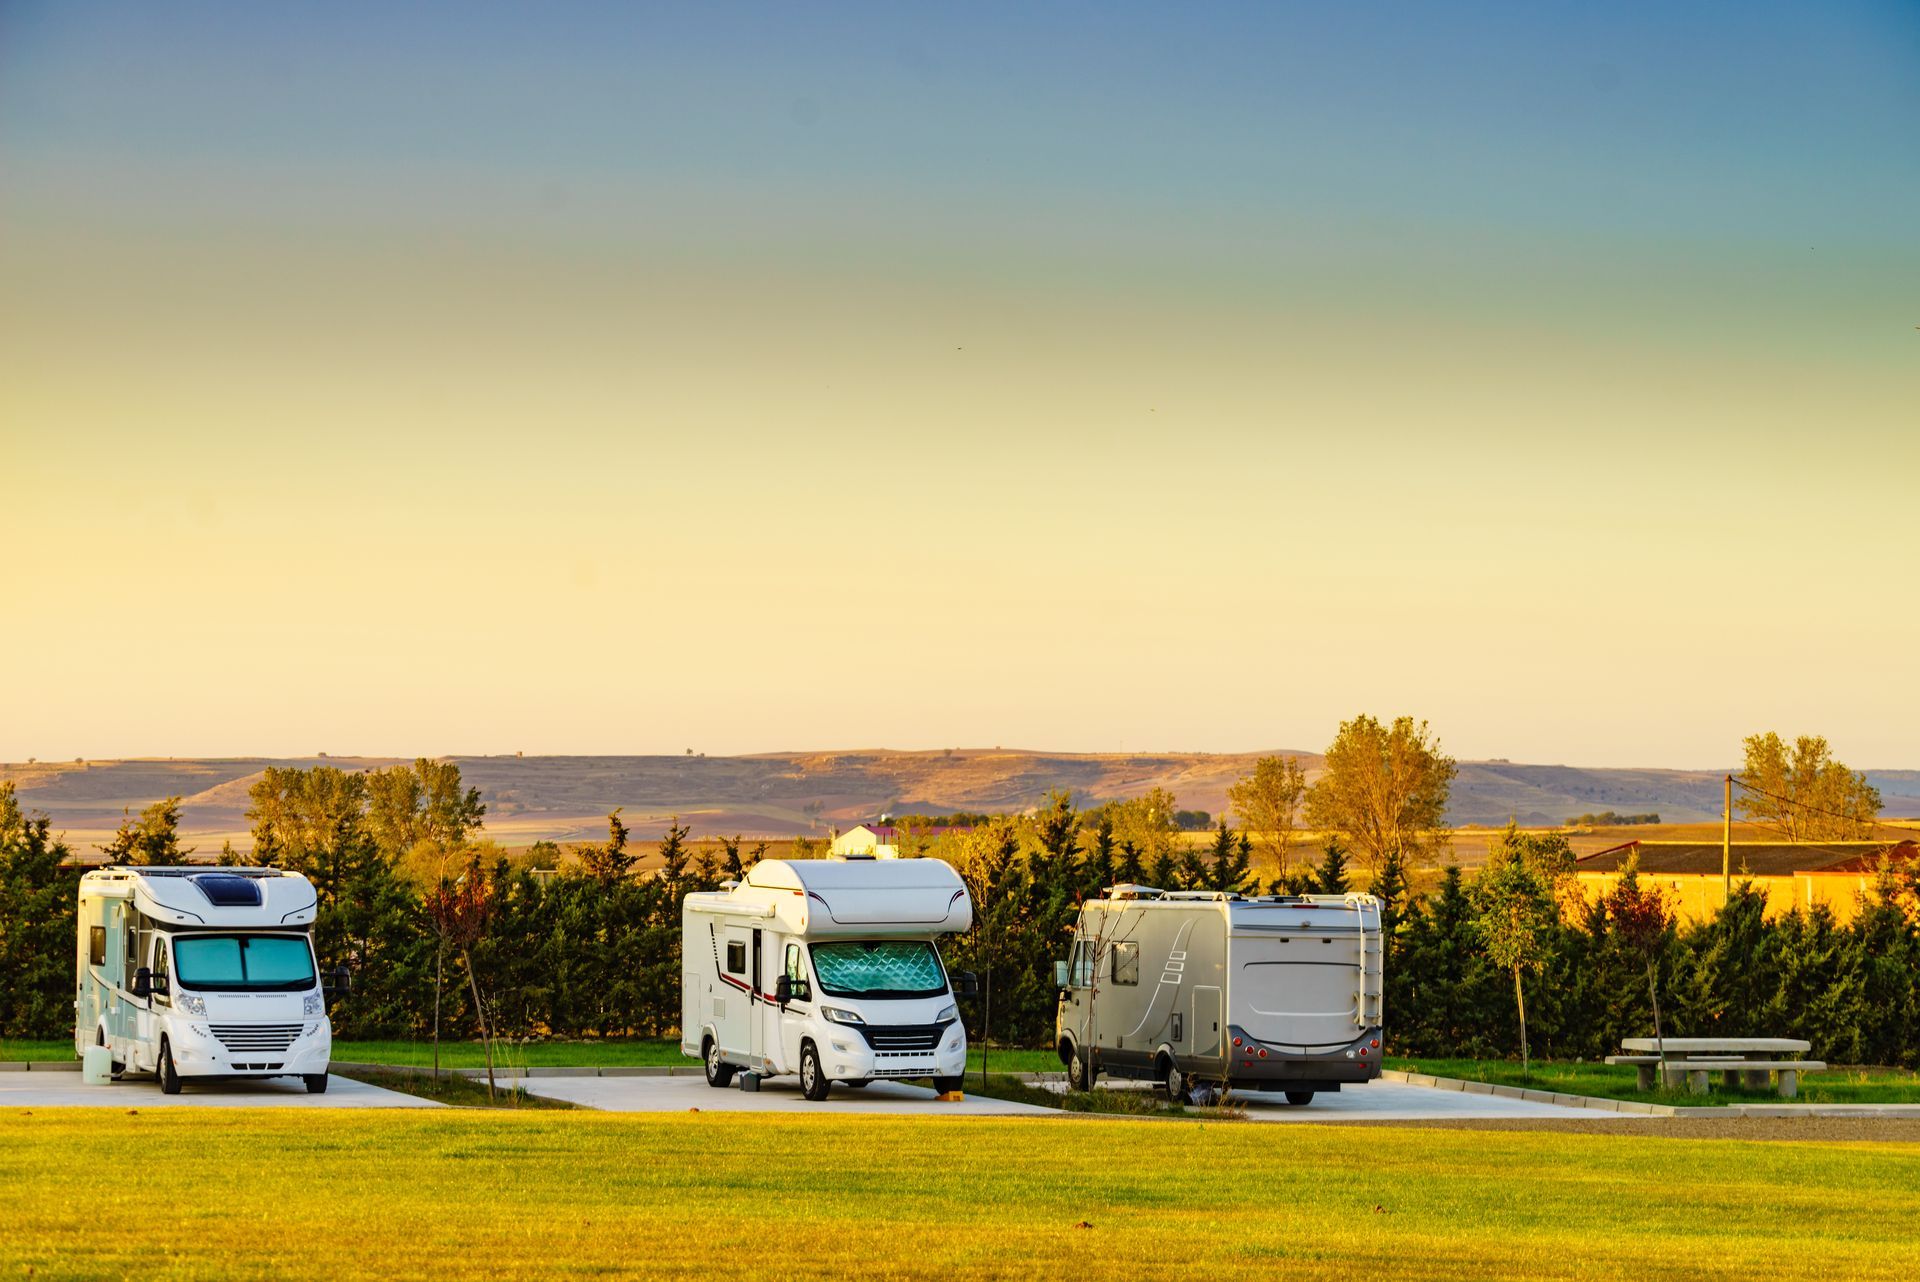 Say Hello to the Wonderful World of RV Camping 10 Reasons You Should